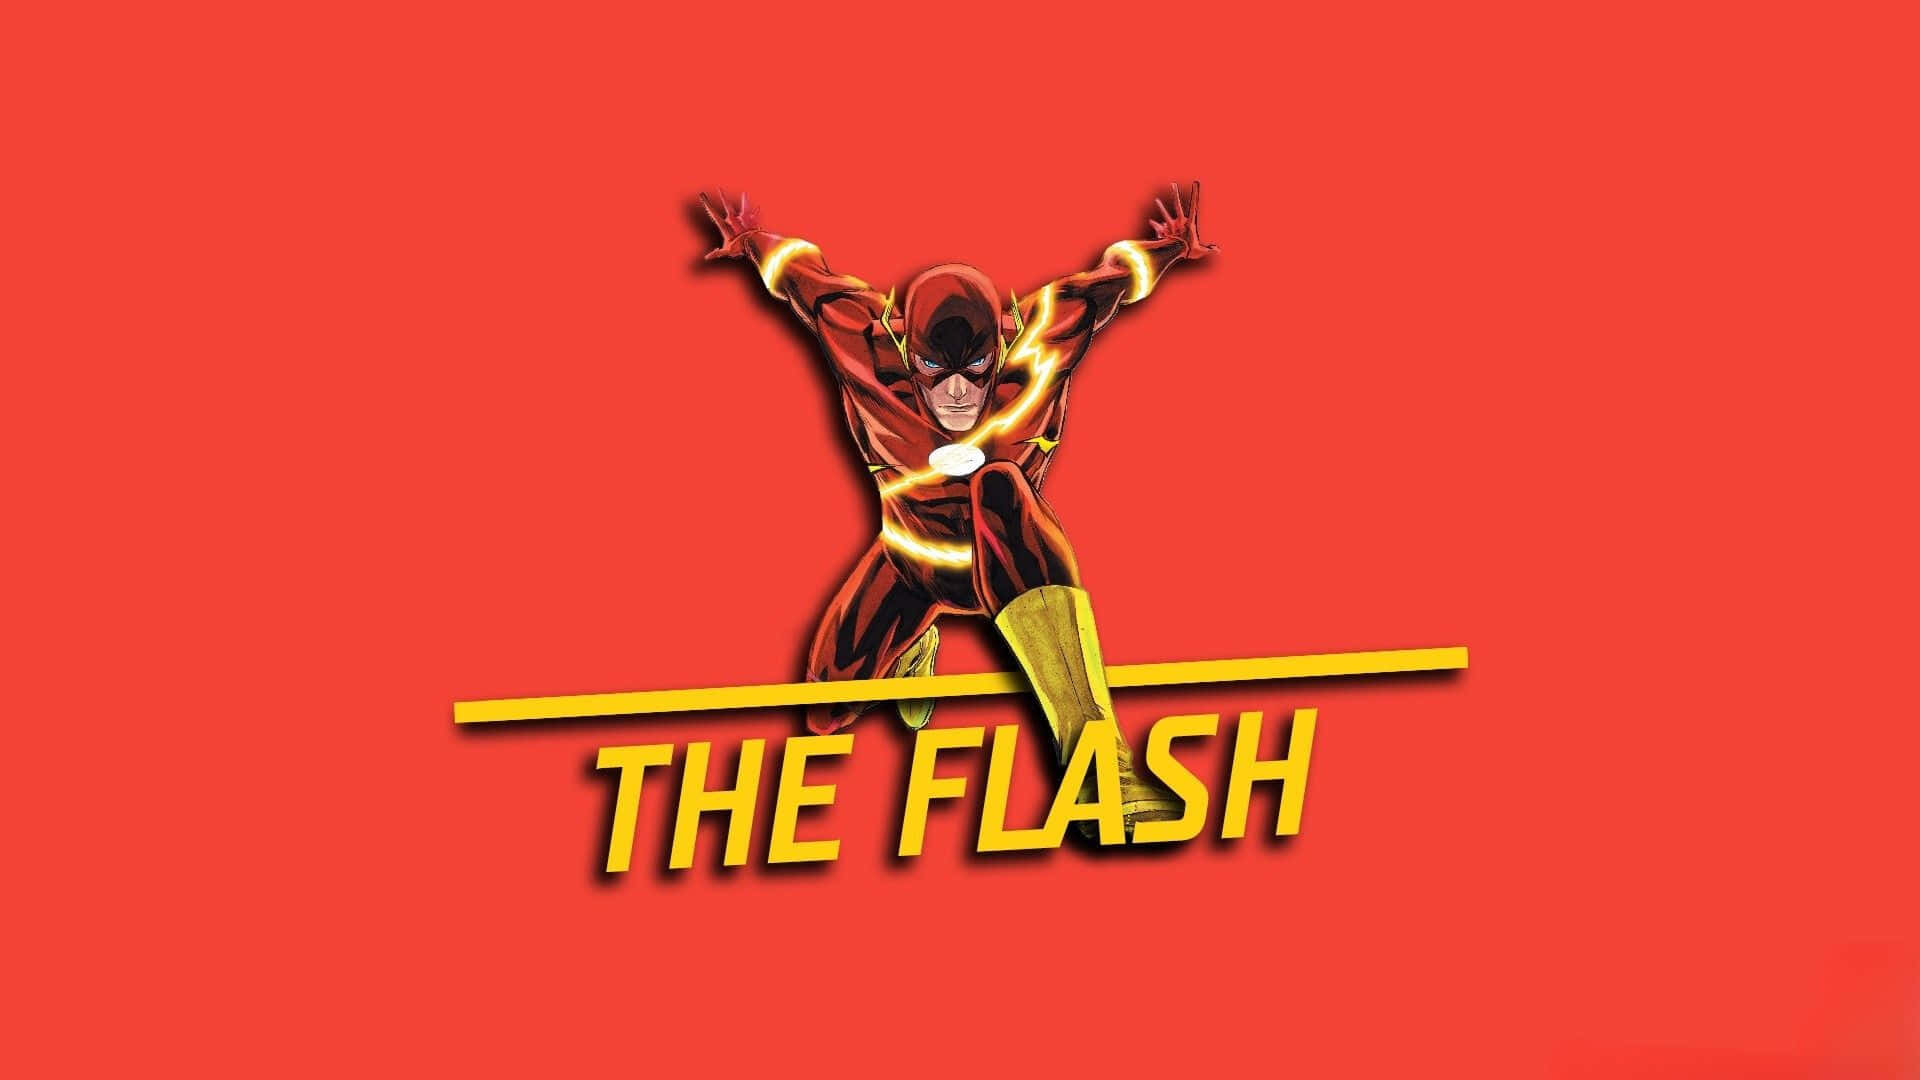 The Flash in Action - Lightning Speeds and Intense Energy